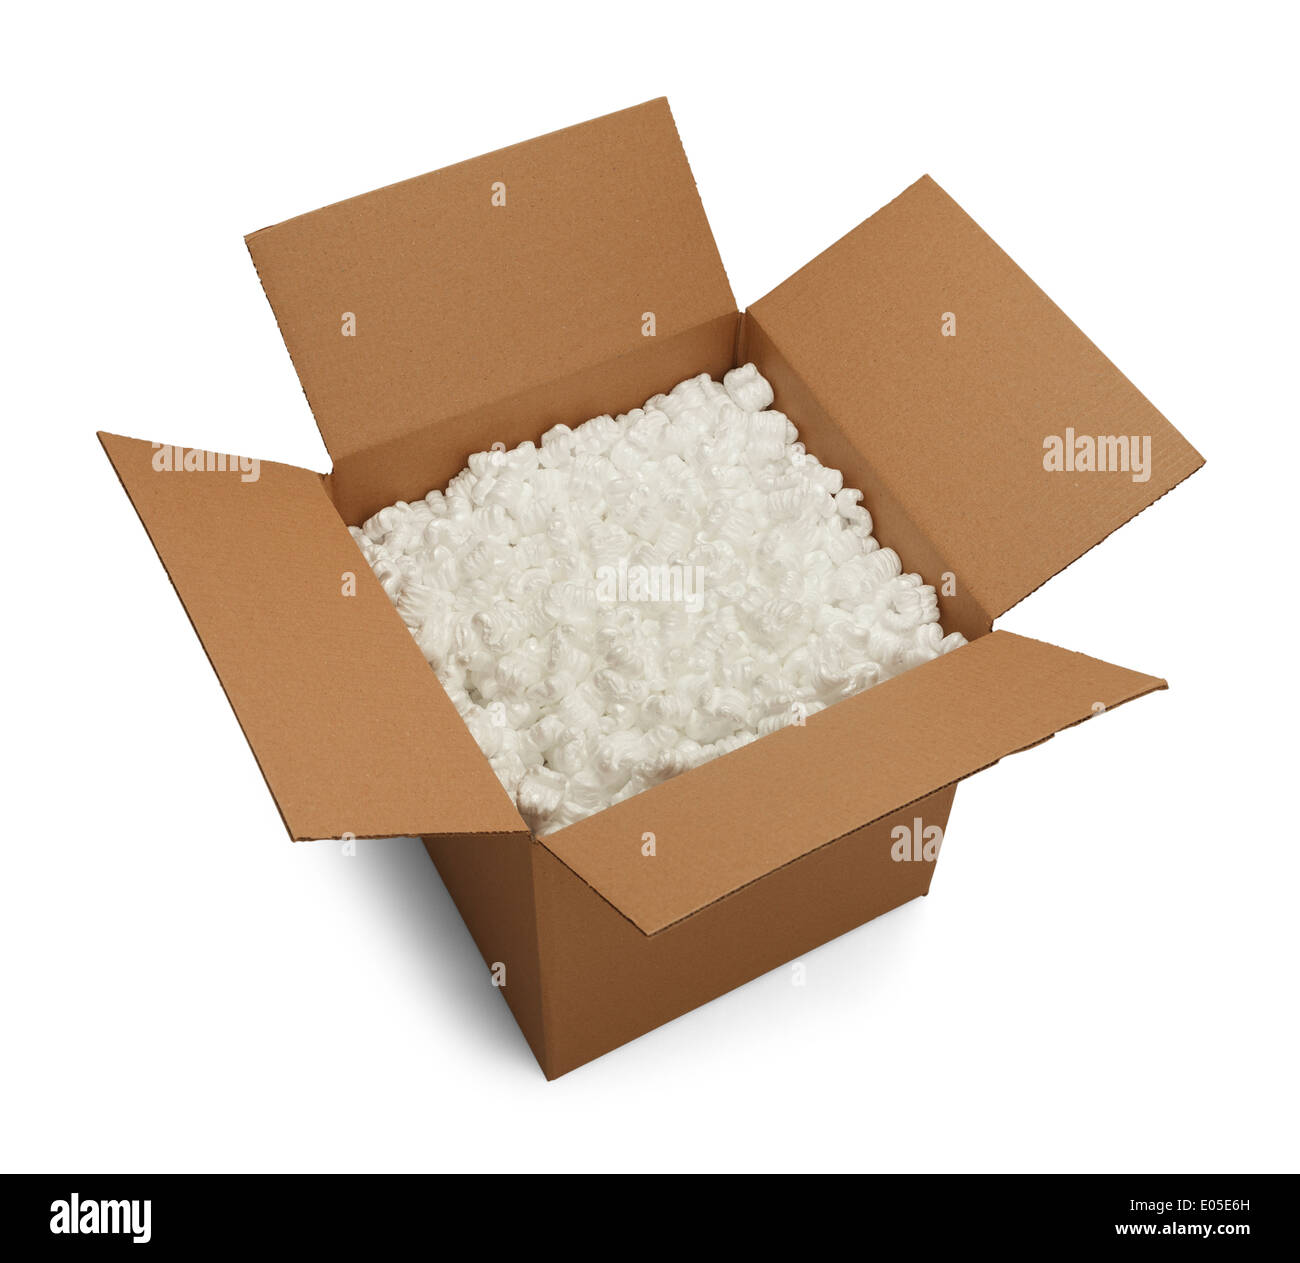 Open Brown Cardboard Box with Packing Peanuts Inside Isolated on White Background. Stock Photo